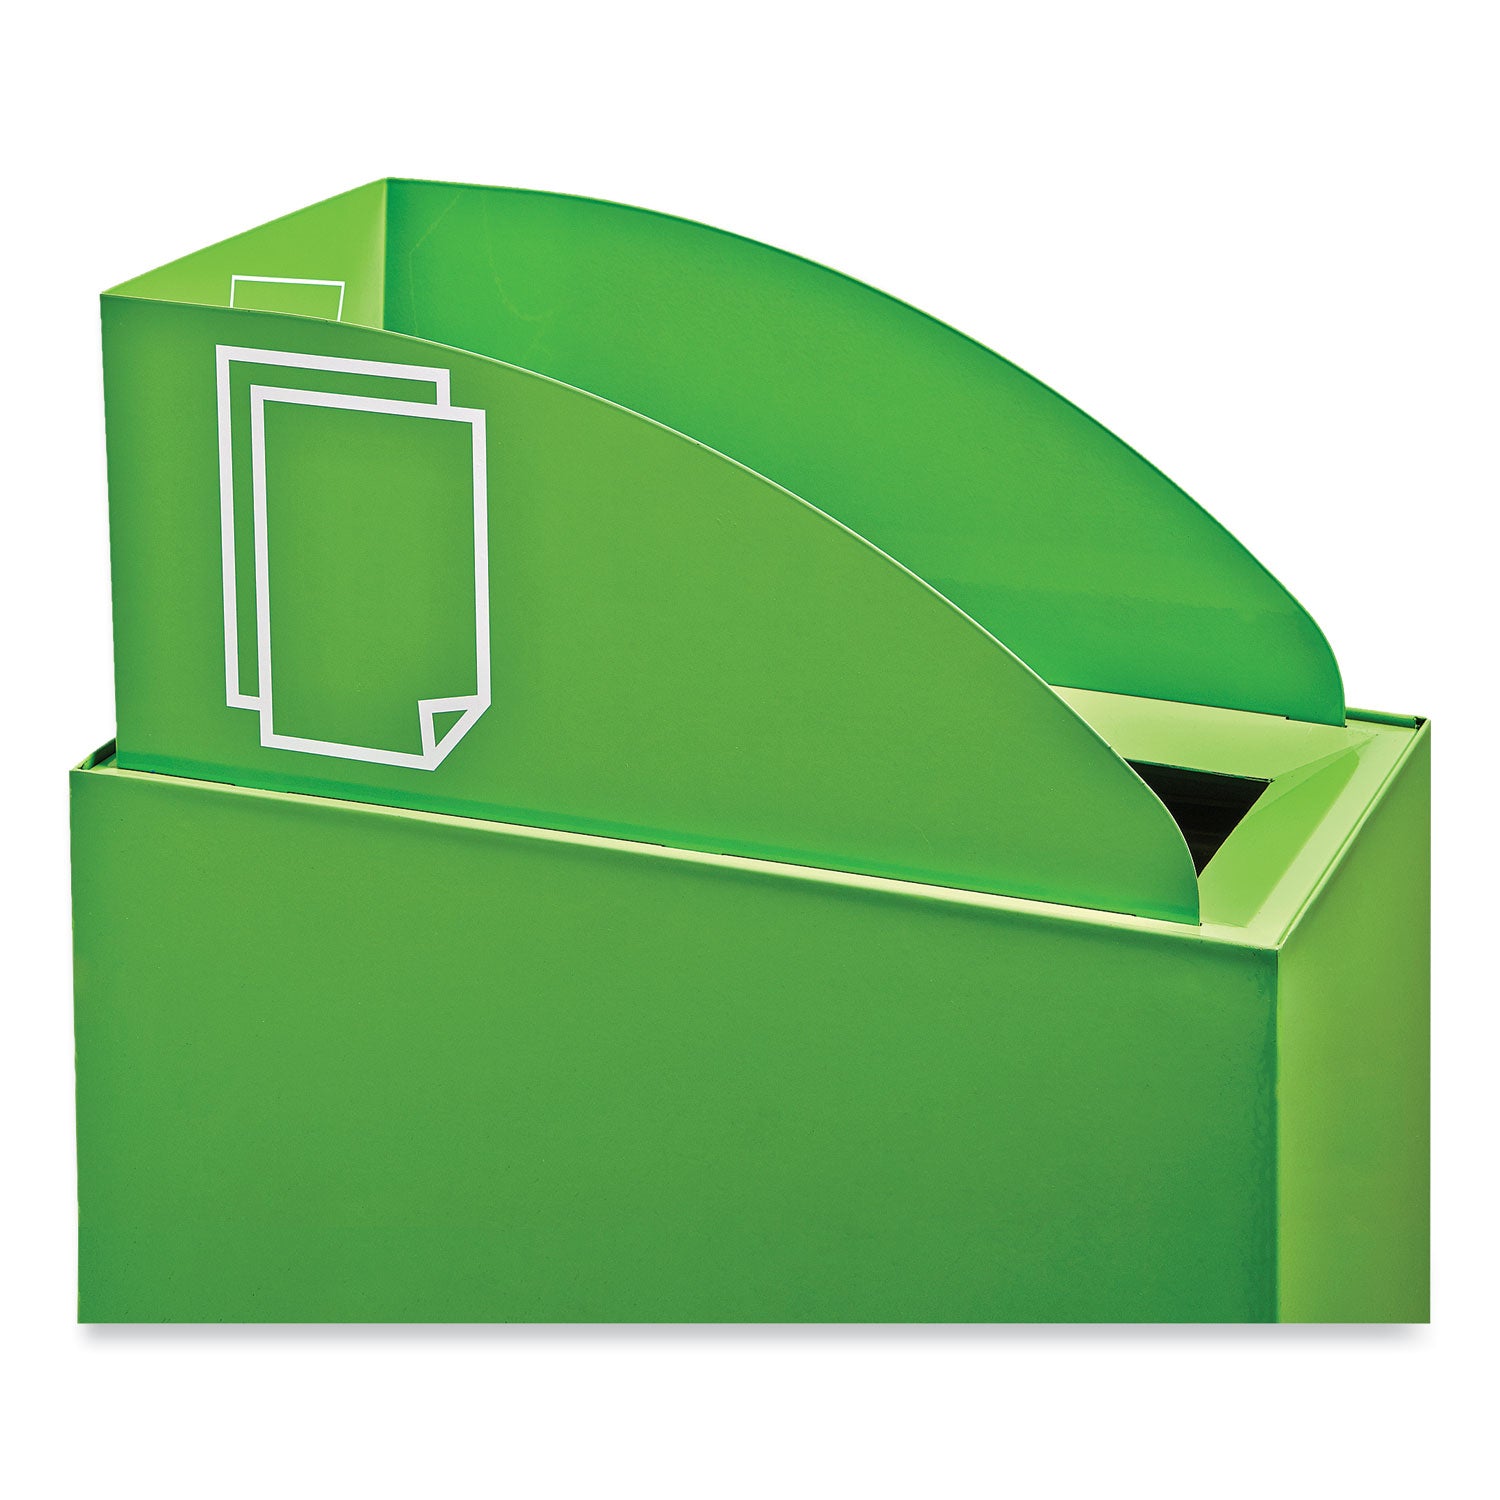 mixx-recycling-center-lid-topper-style-987w-x-1987d-x-062h-green-ships-in-1-3-business-days_saf9449gn - 8